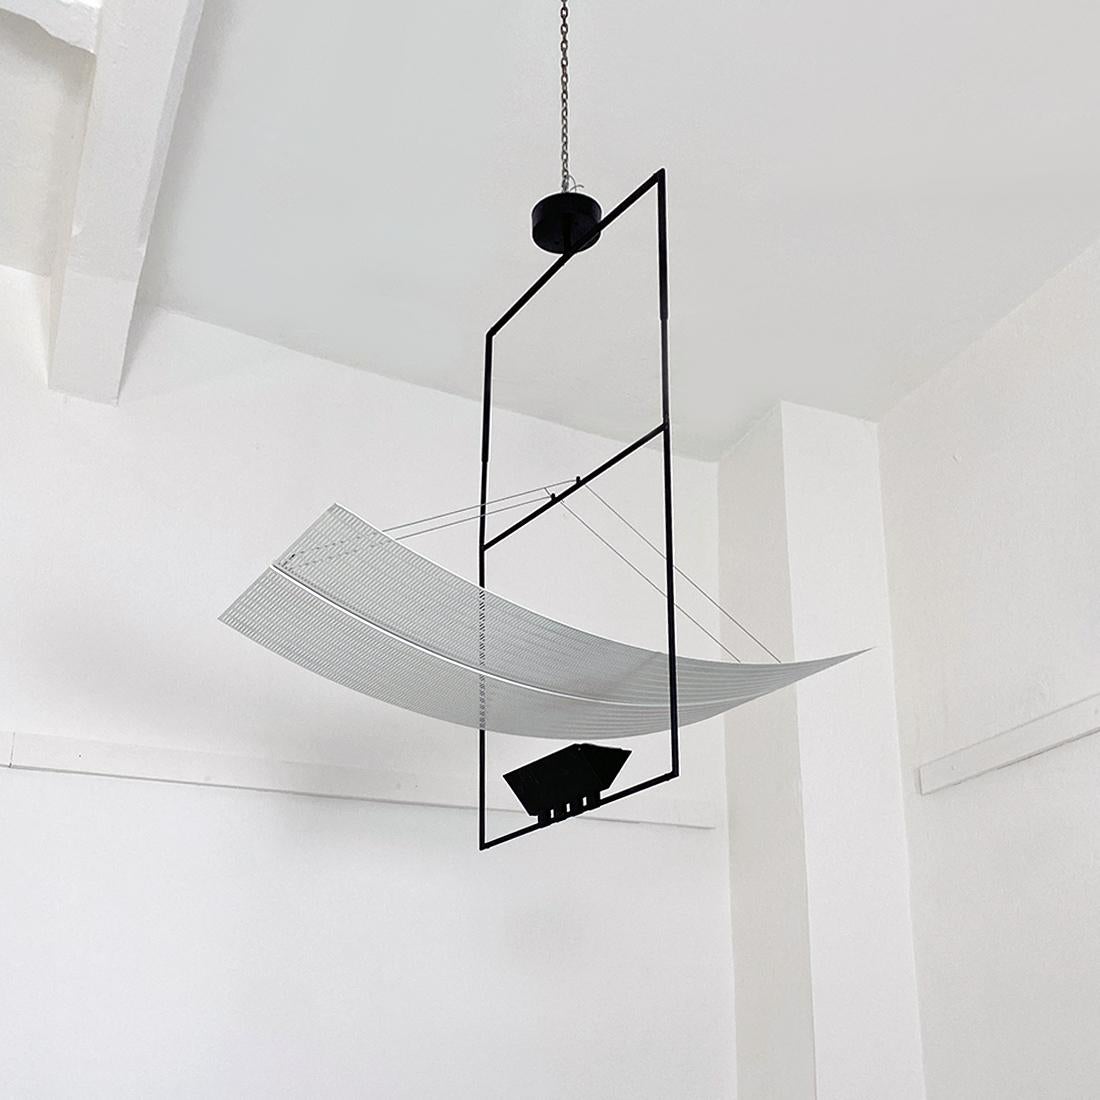 Italian post modern black and white metal Zefiro chandelier by Mario Botta for Artemide, 1980s
Zefiro model chandelier, with structure in black metal rod in the center of which a curved perforated and white enamelled metal wing hangs.
Designed by